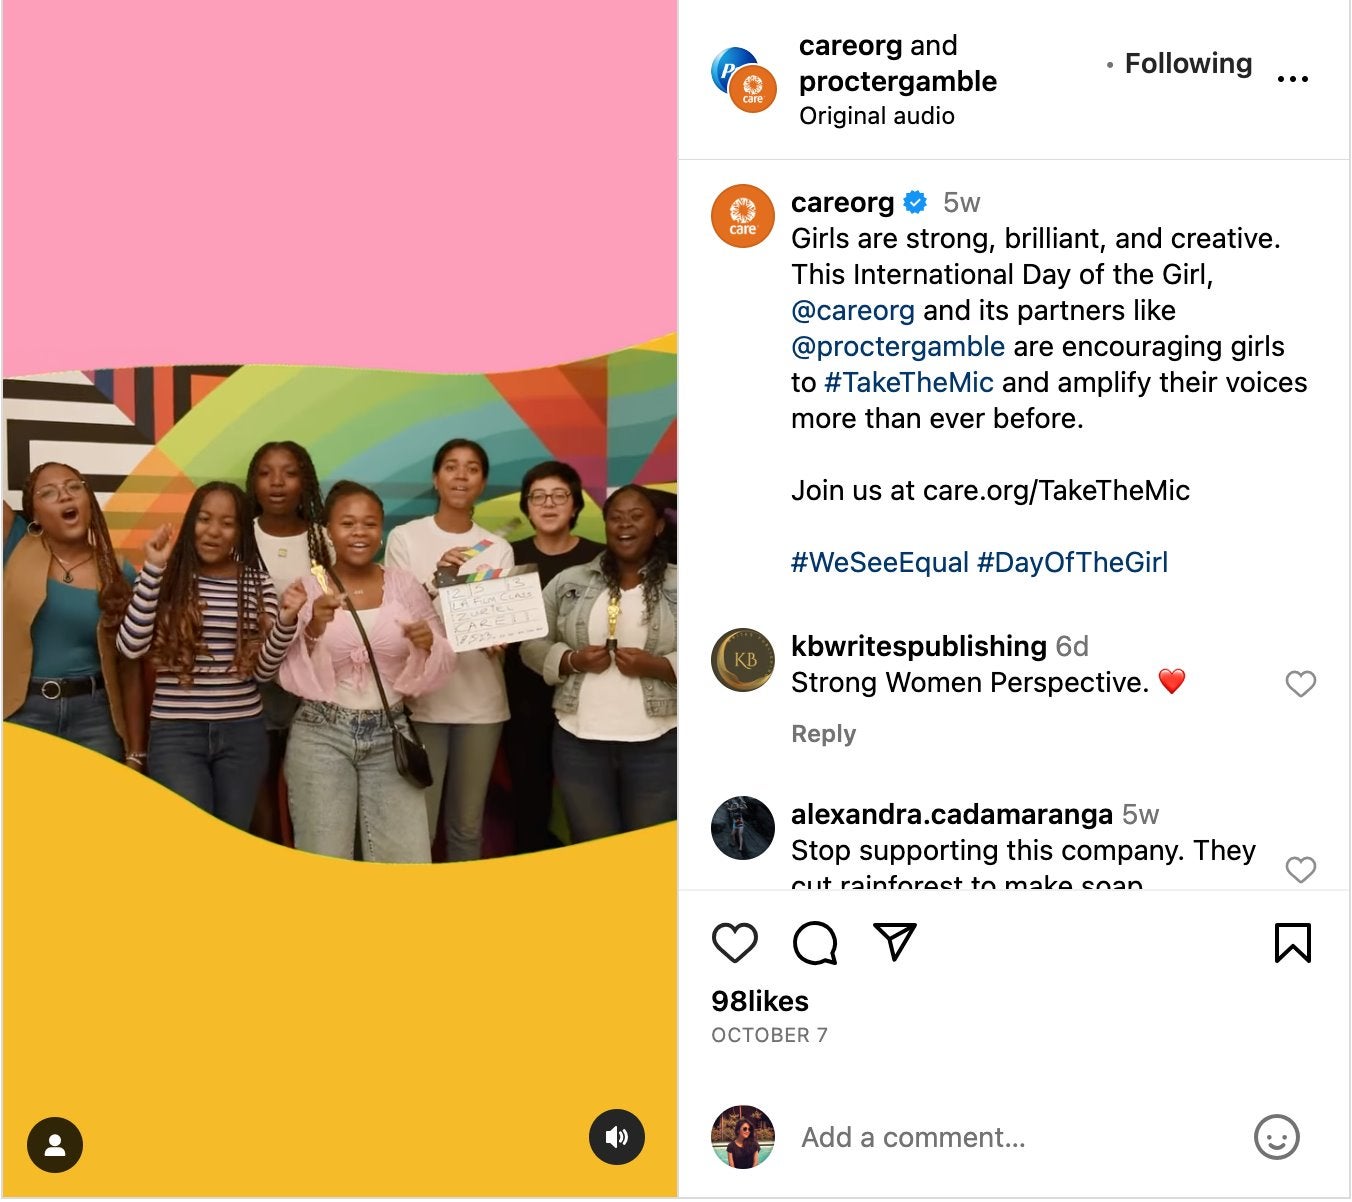 A joint Instagram post by CARE and P&G celebrating International Day of the Girl.